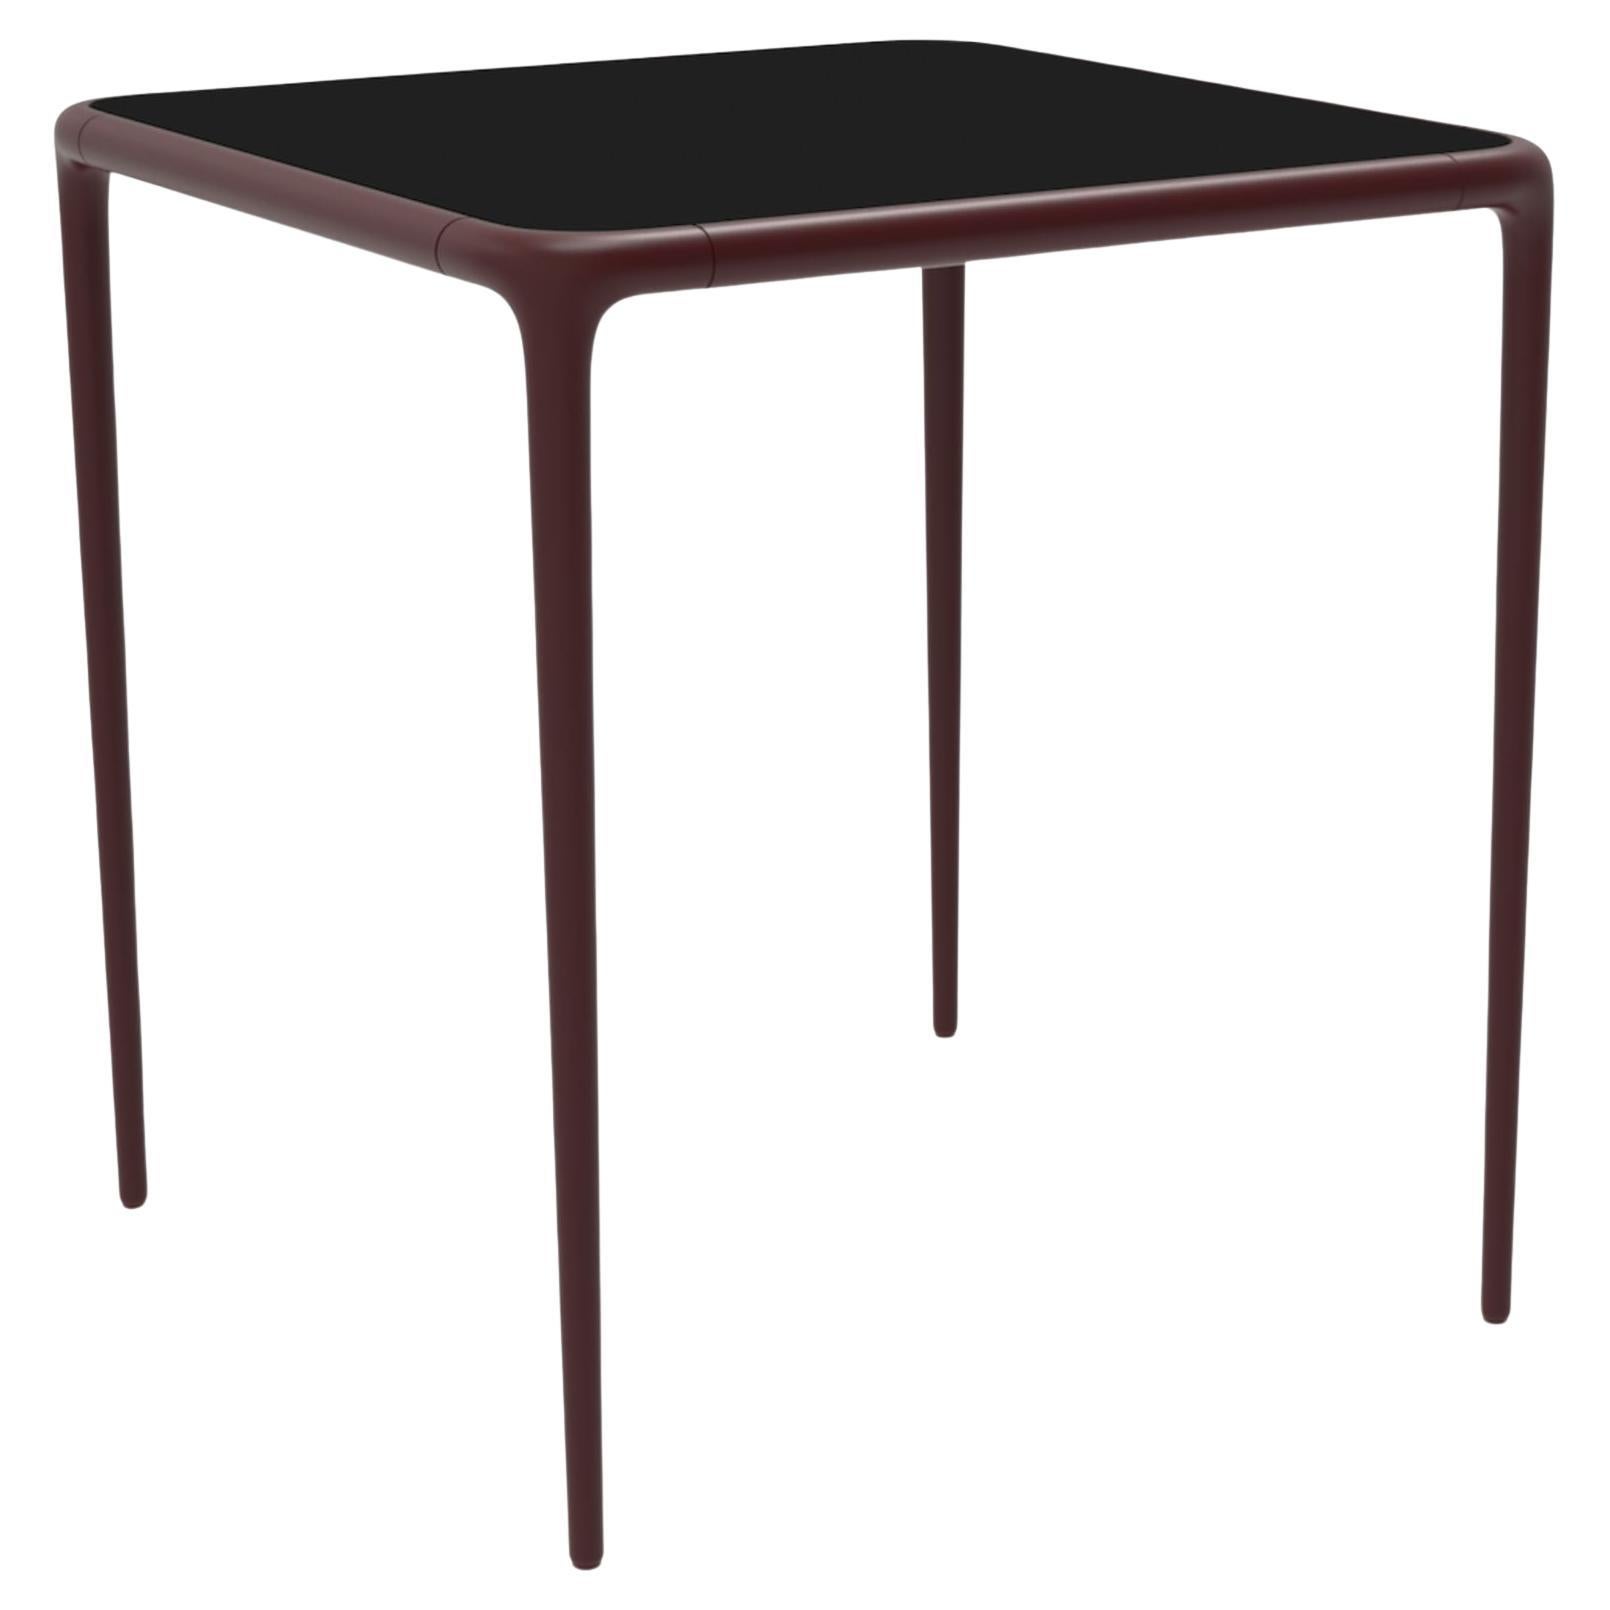 Xaloc Burgundy Glass Top Table 70 by Mowee For Sale